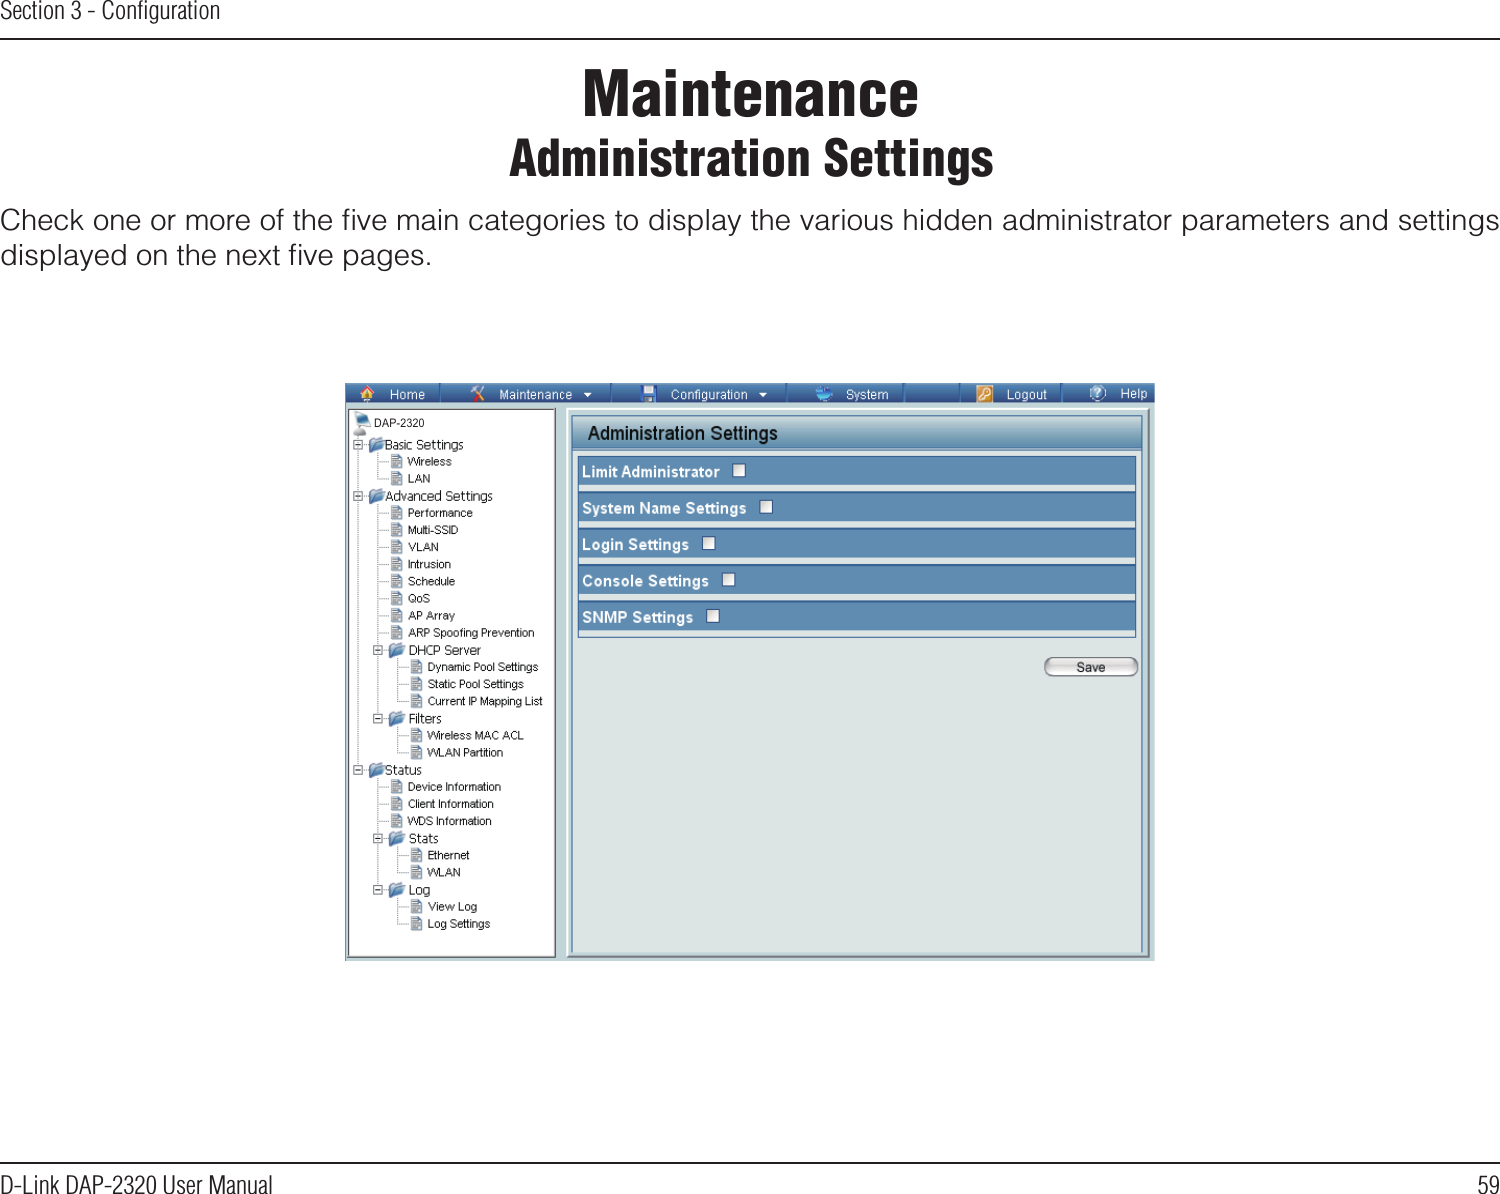 59D-Link DAP-2320 User ManualSection 3 - ConﬁgurationCheck one or more of the ﬁve main categories to display the various hidden administrator parameters and settings displayed on the next ﬁve pages.  Maintenance Administration SettingsDAP-2320